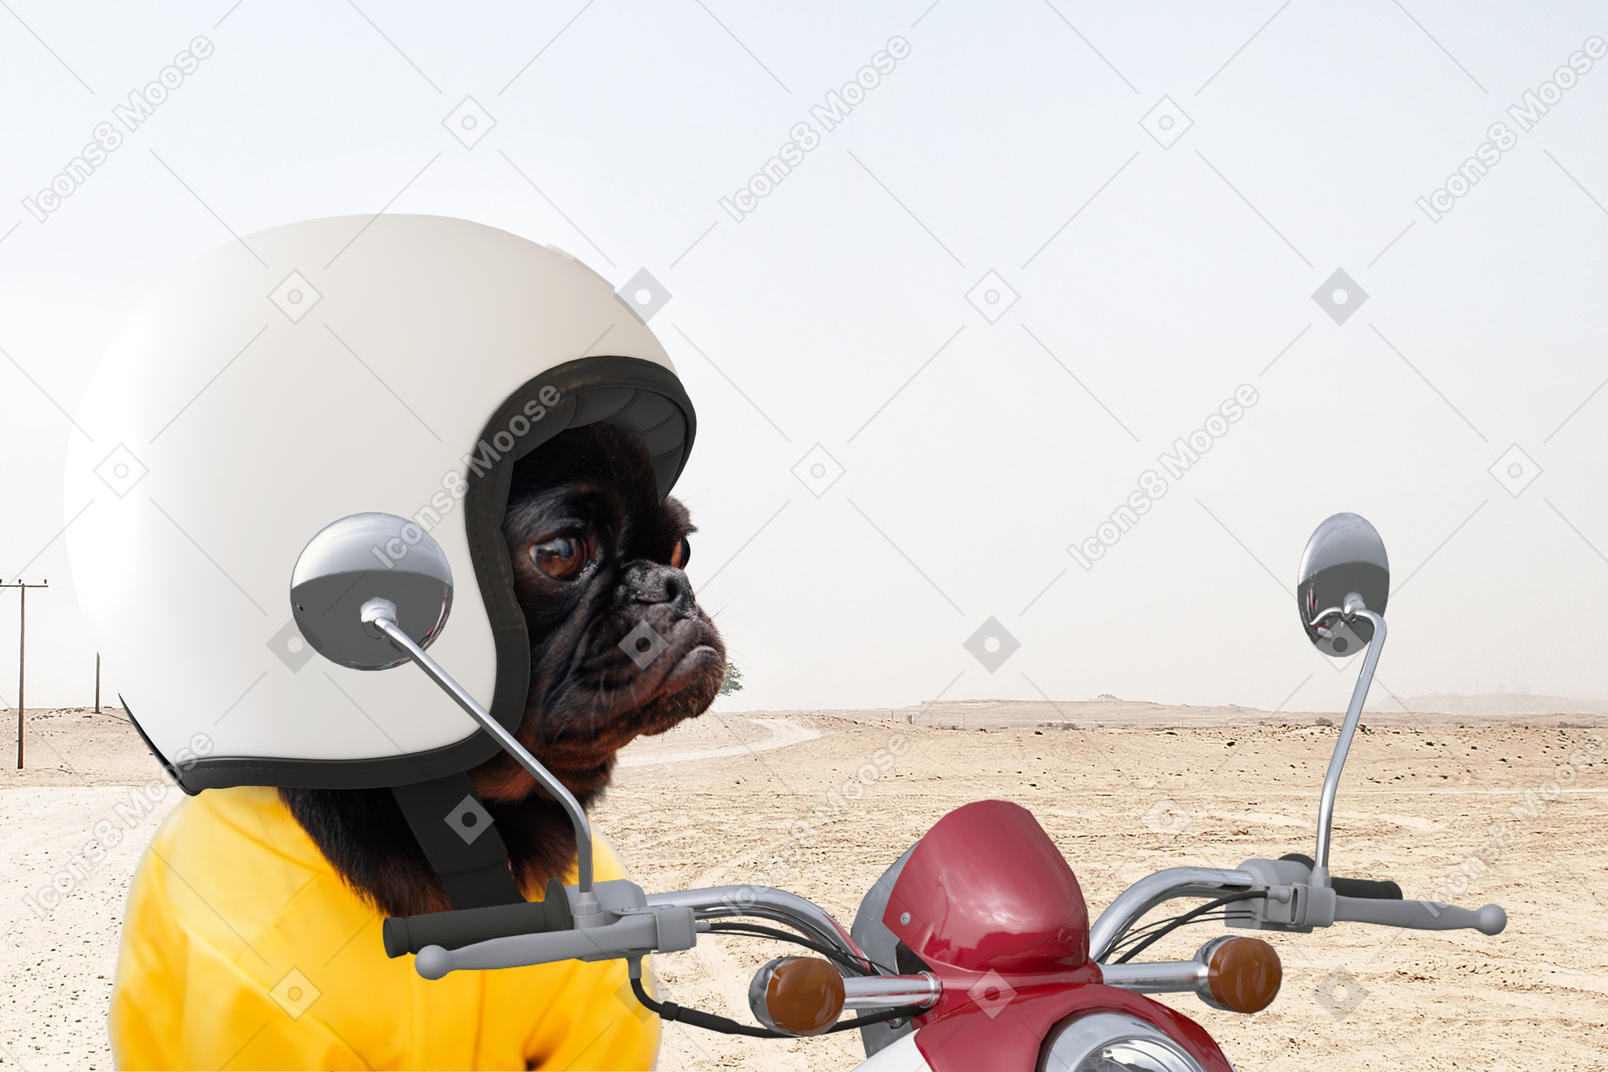 A woman with a motorcycle helmet and a helmet